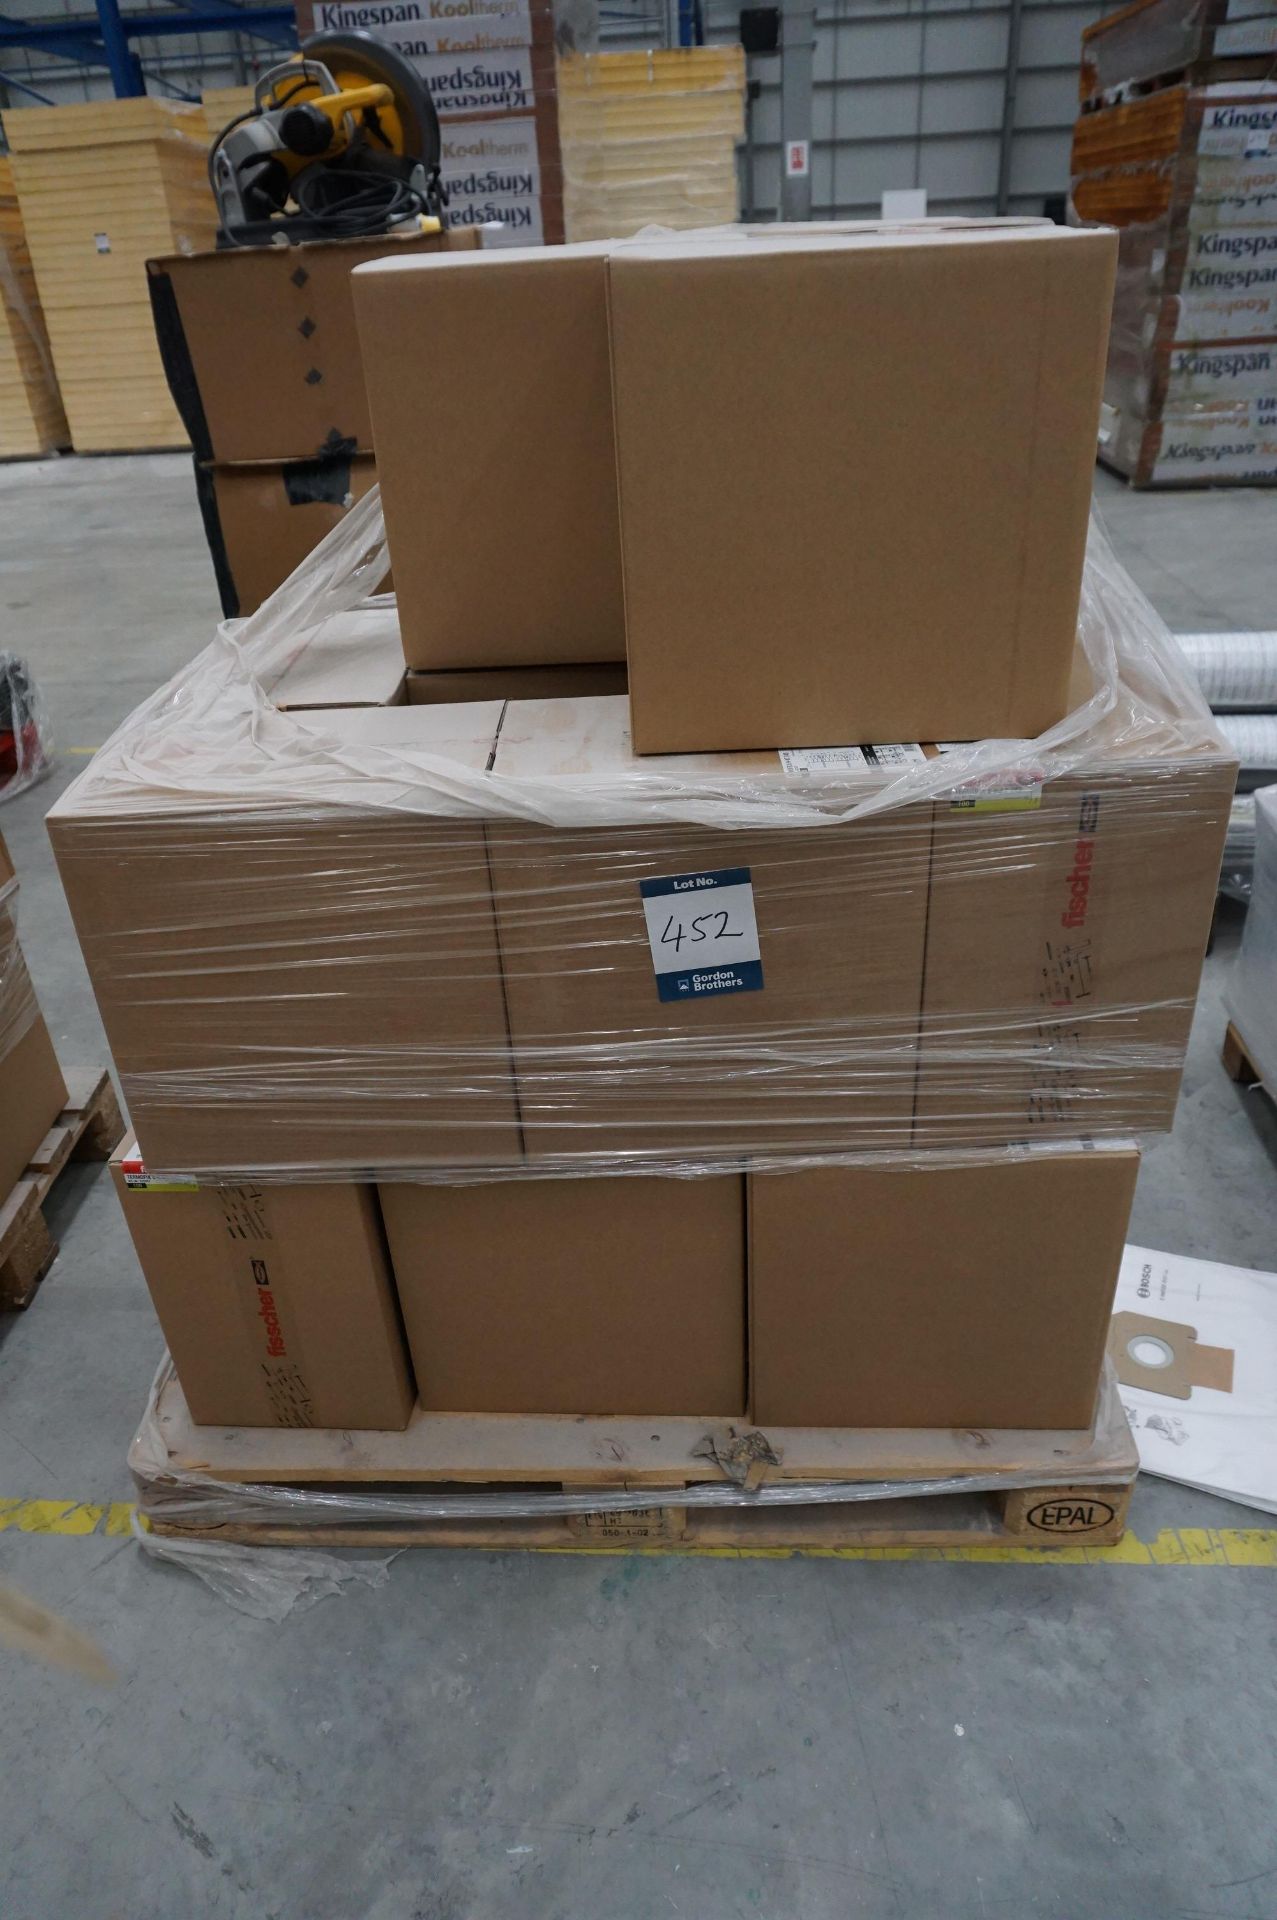 15x (no.) boxes of Fischer Termofix 6-H-NT240 Art Nr 523207 total of 1800 fixings